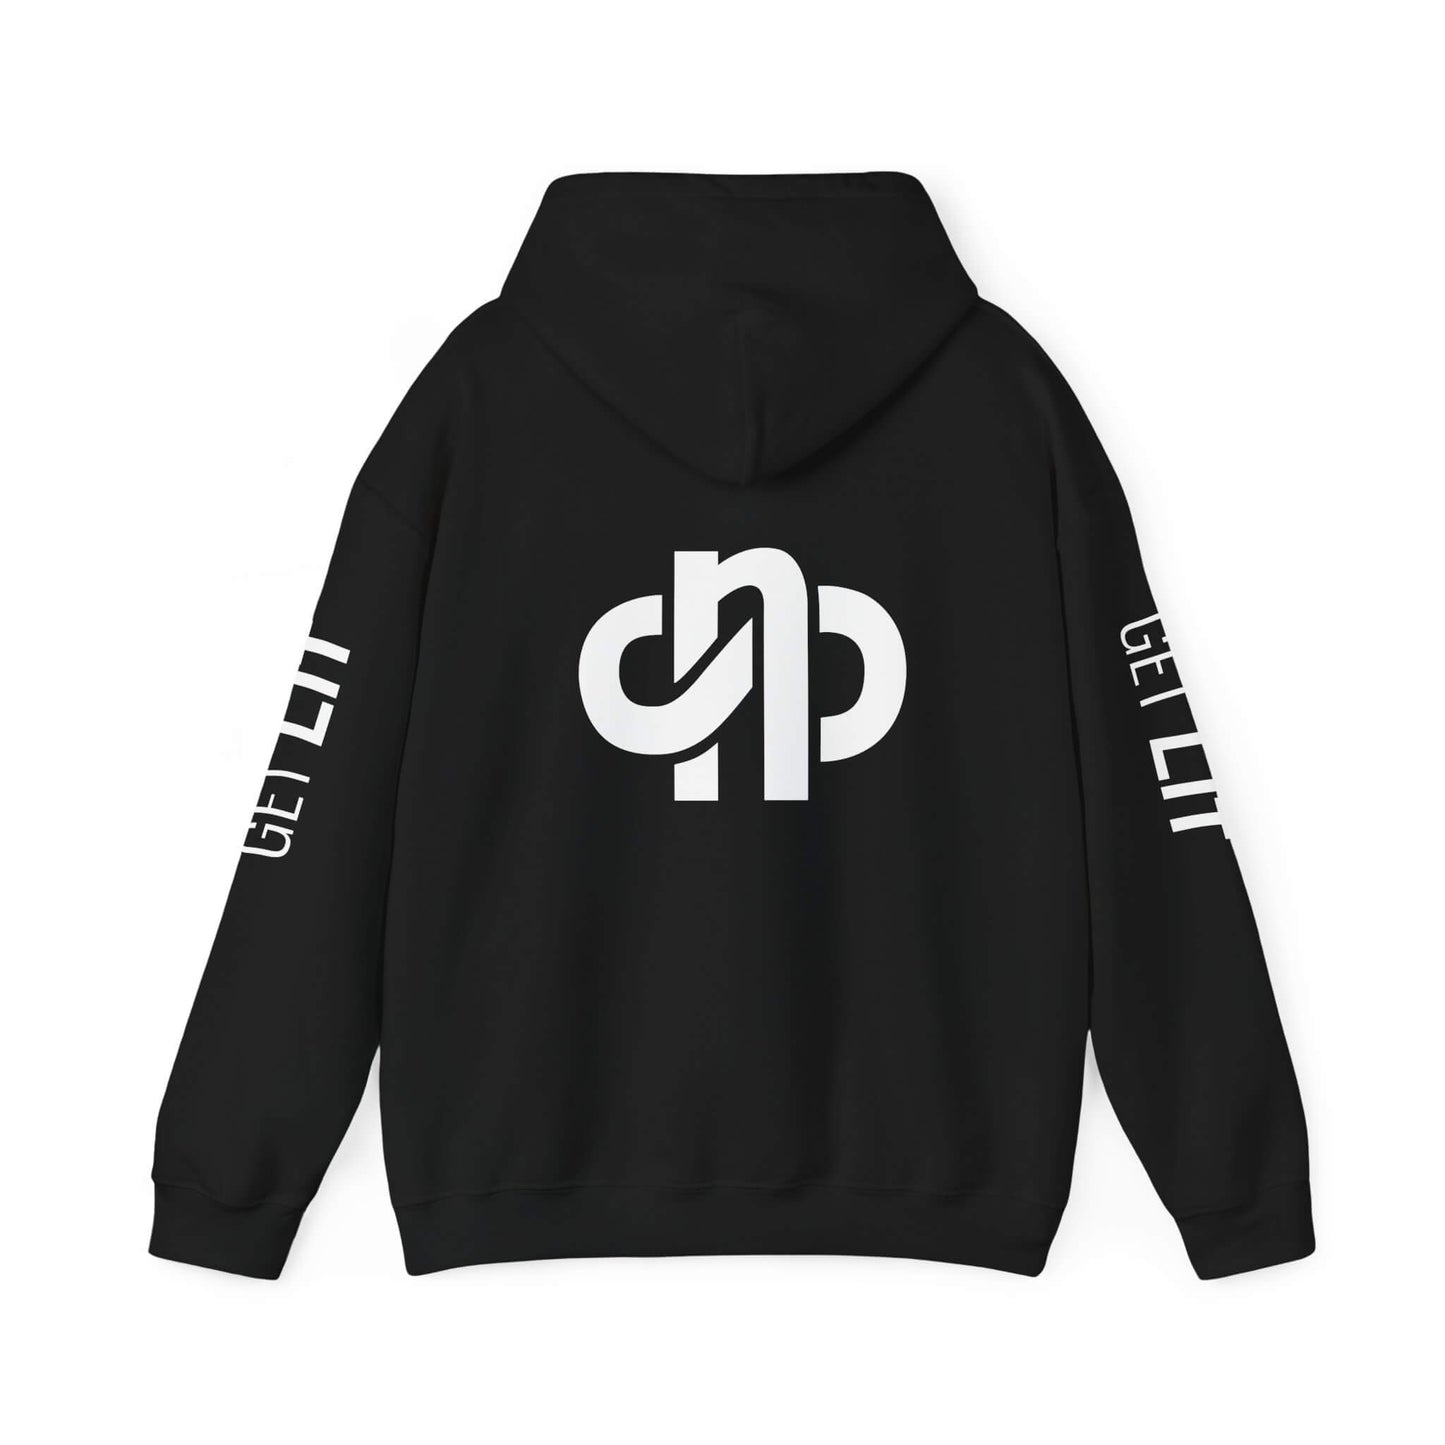 GET LIT - Classic Hoodie (Pullover)